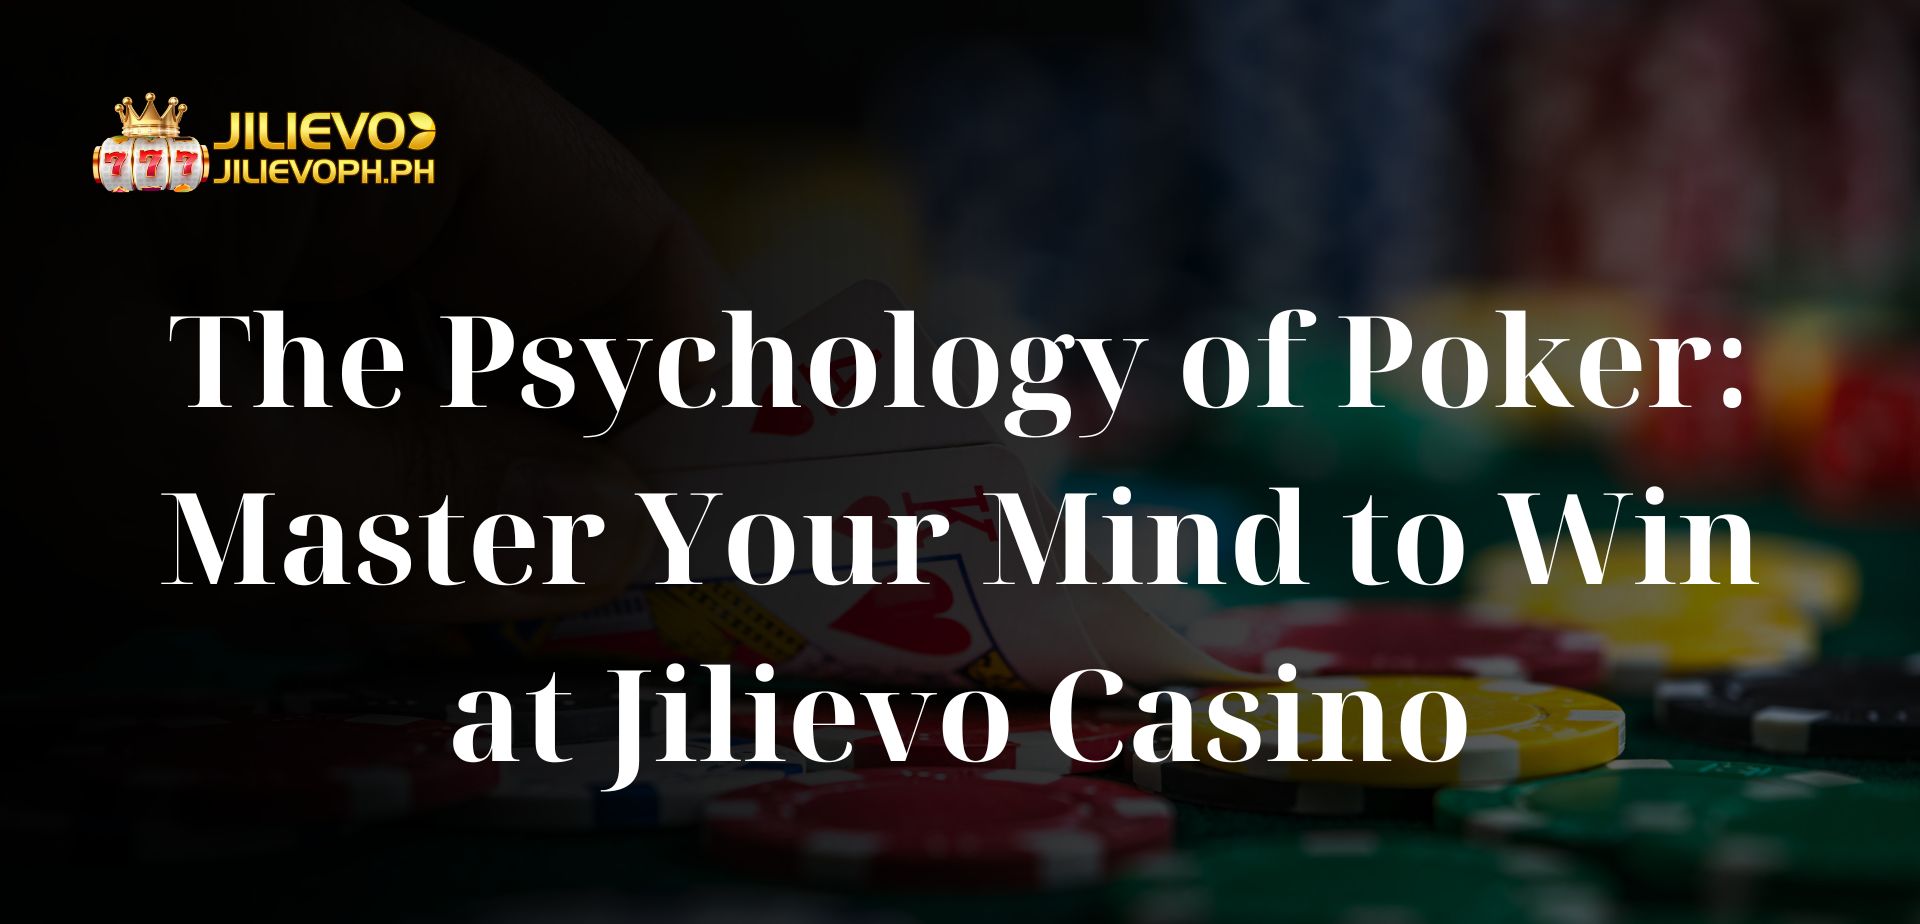 The Psychology of Poker: Master Your Mind to Win at Jilievo Casino